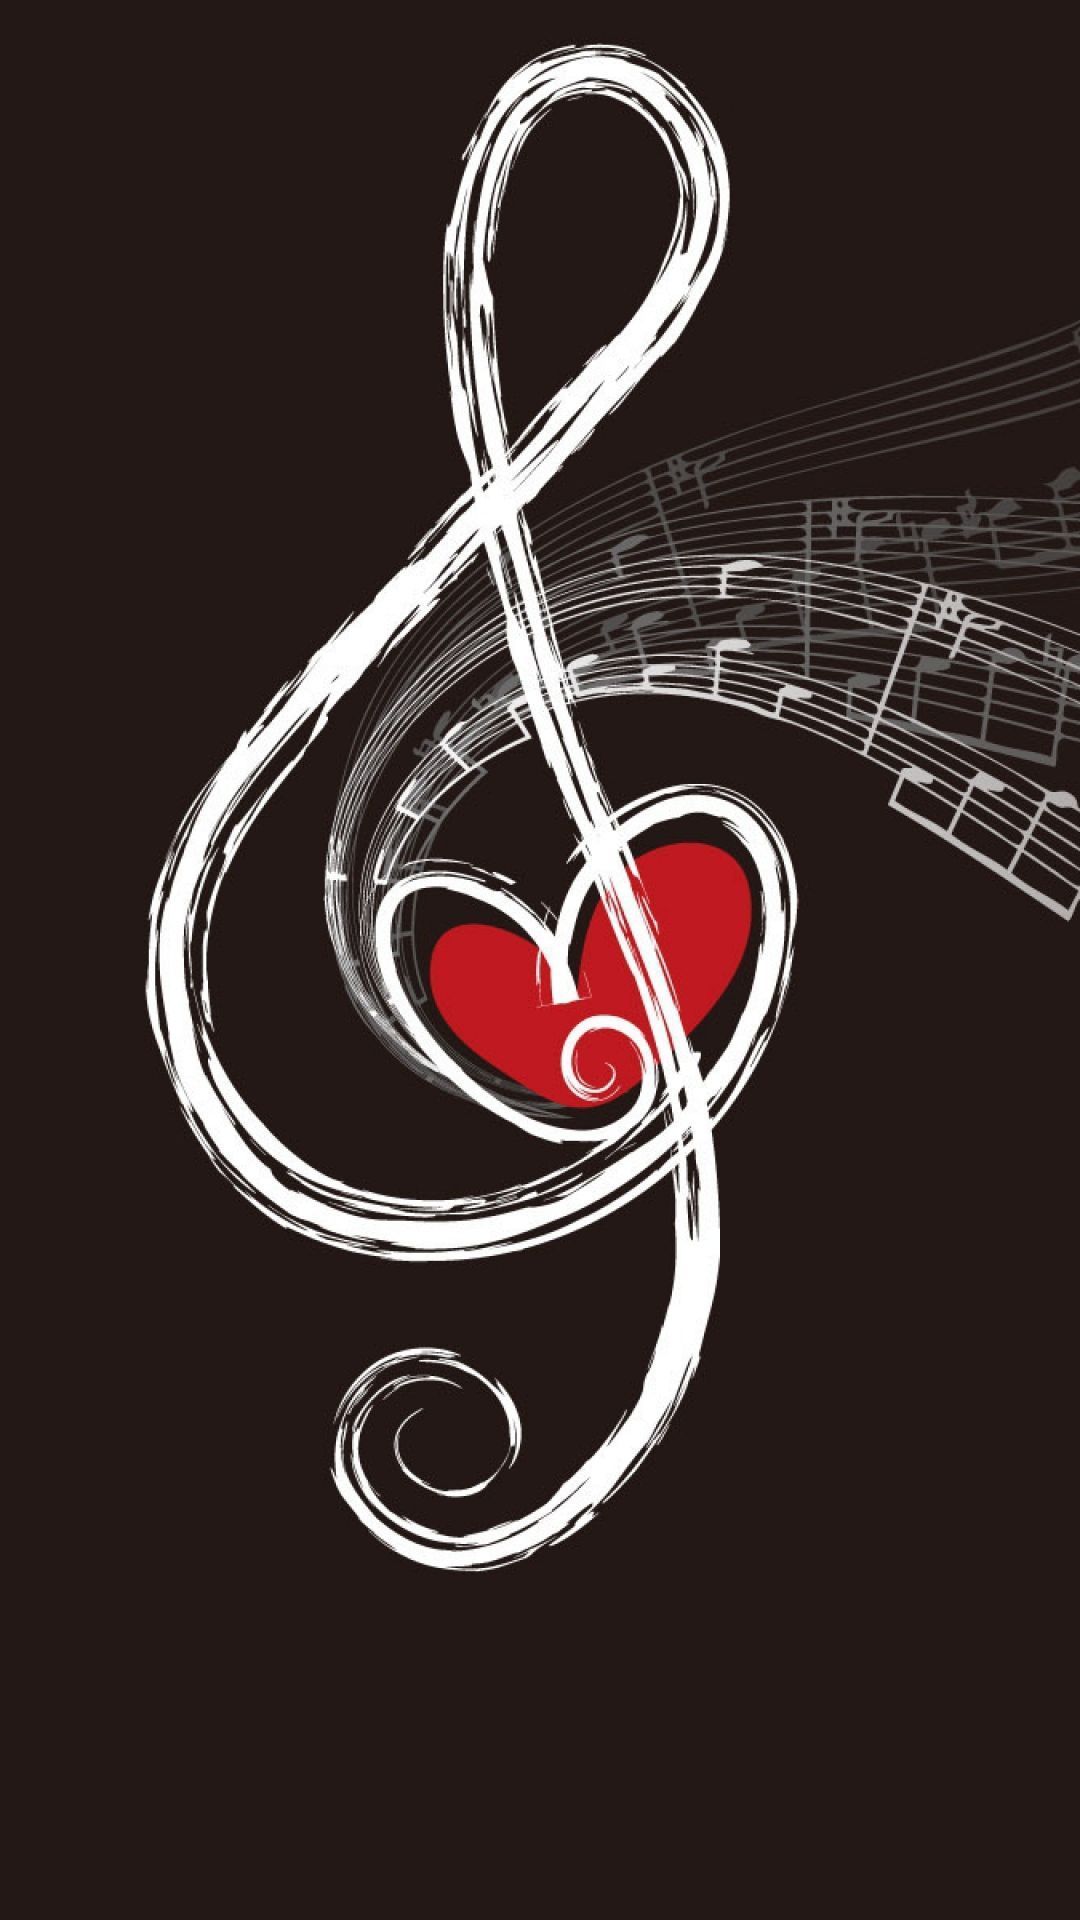 Download Wallpaper 1080x1920 Treble clef, Drawing, Chalk Sony ...